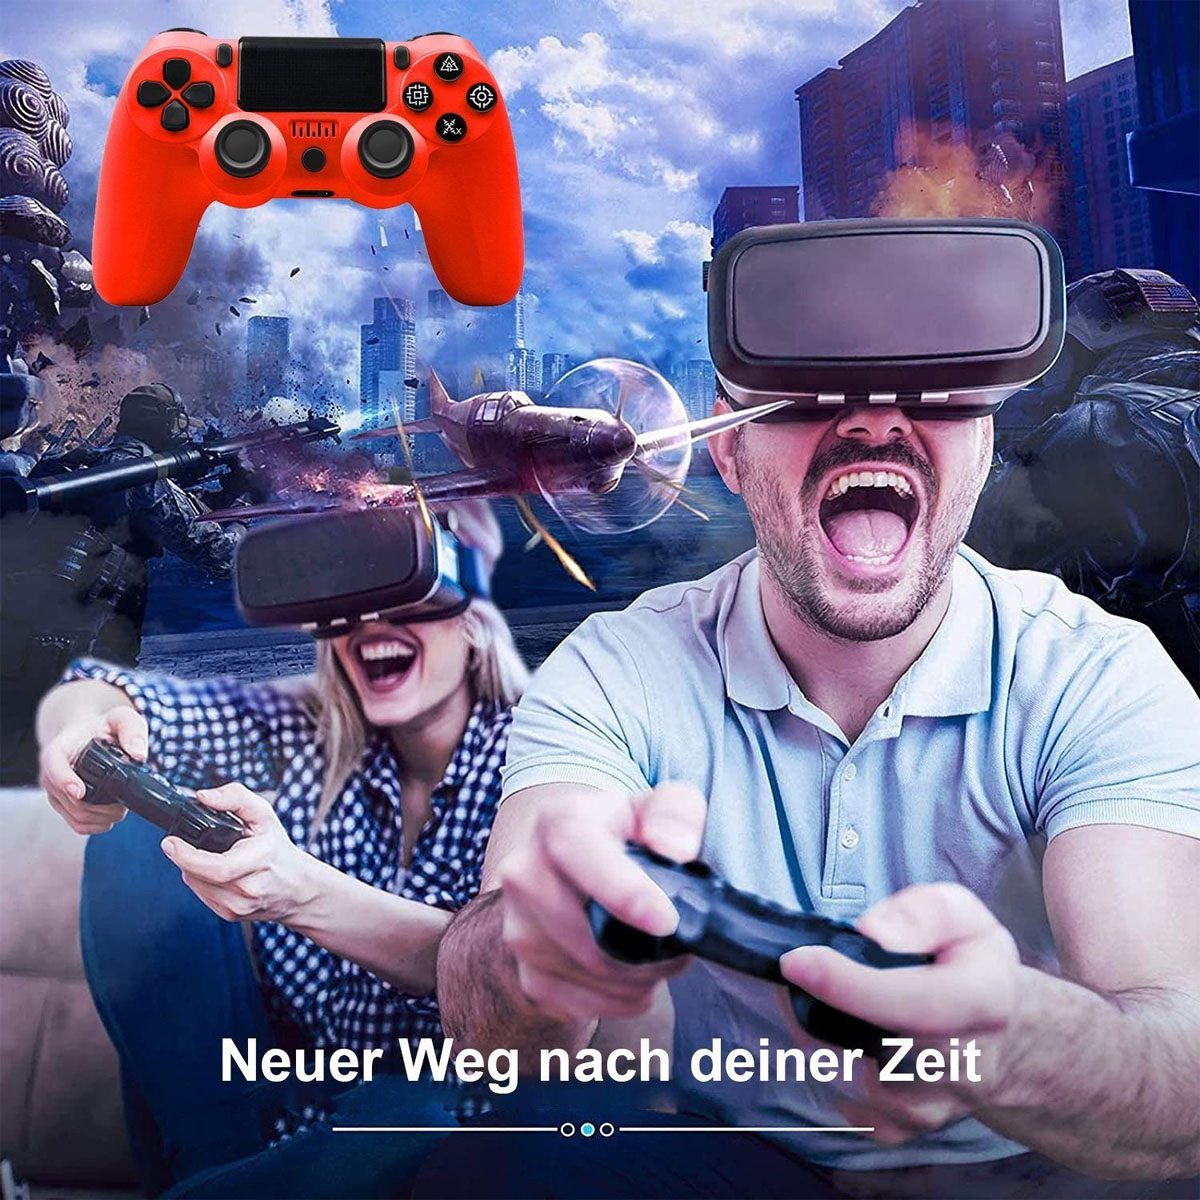 RESPIEL Gamepad, Bluetooth PC/PS3/PS4 Wireless Rotes, rot Gamepad, Controller, Controller für